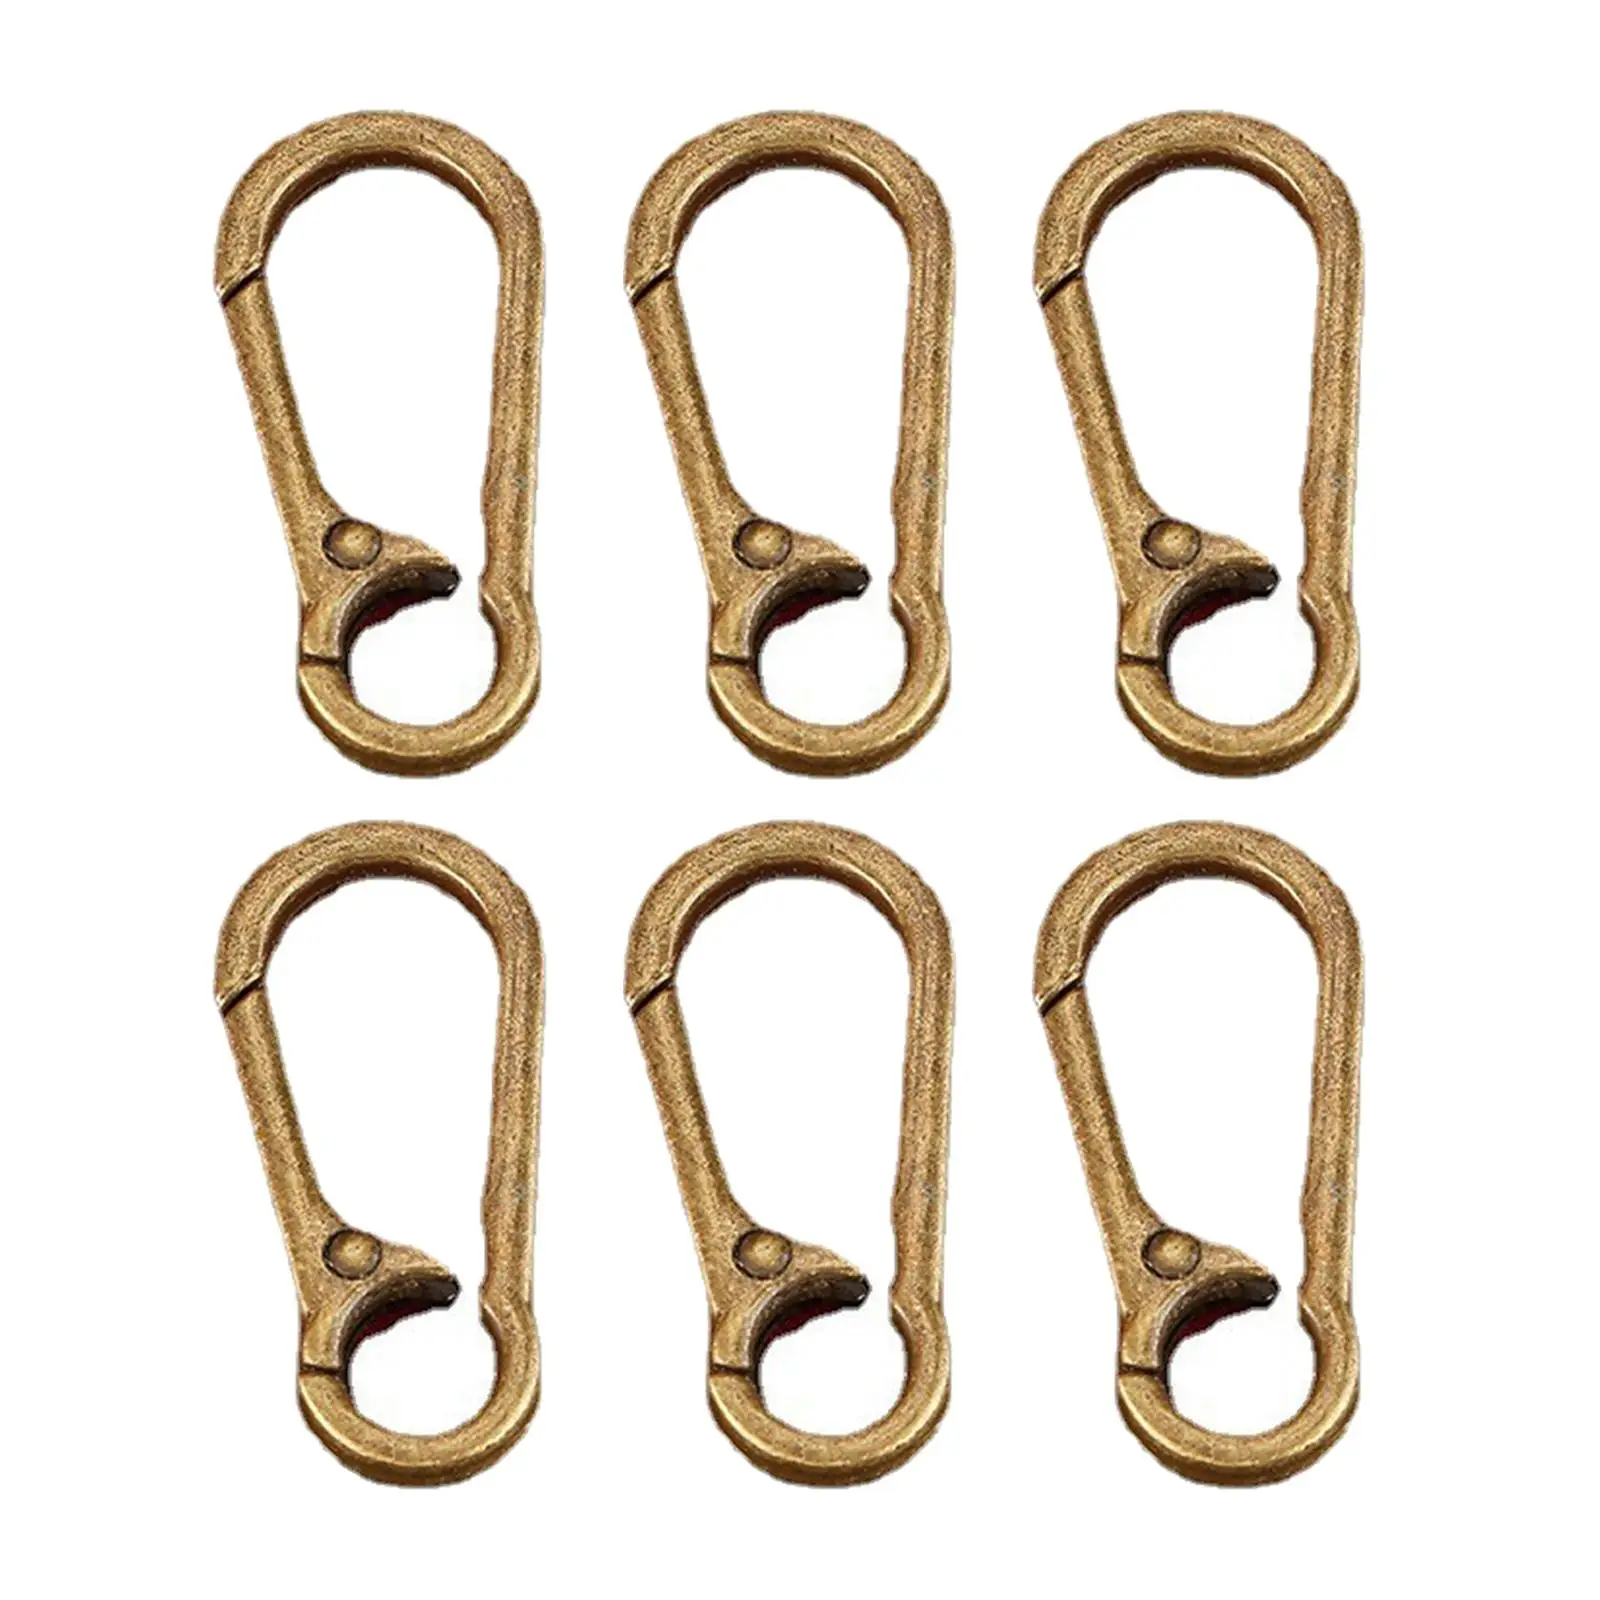 6 Pieces Carabiner Clips Keychain 1.8 inch Distressed Metal Key Clips for Belt